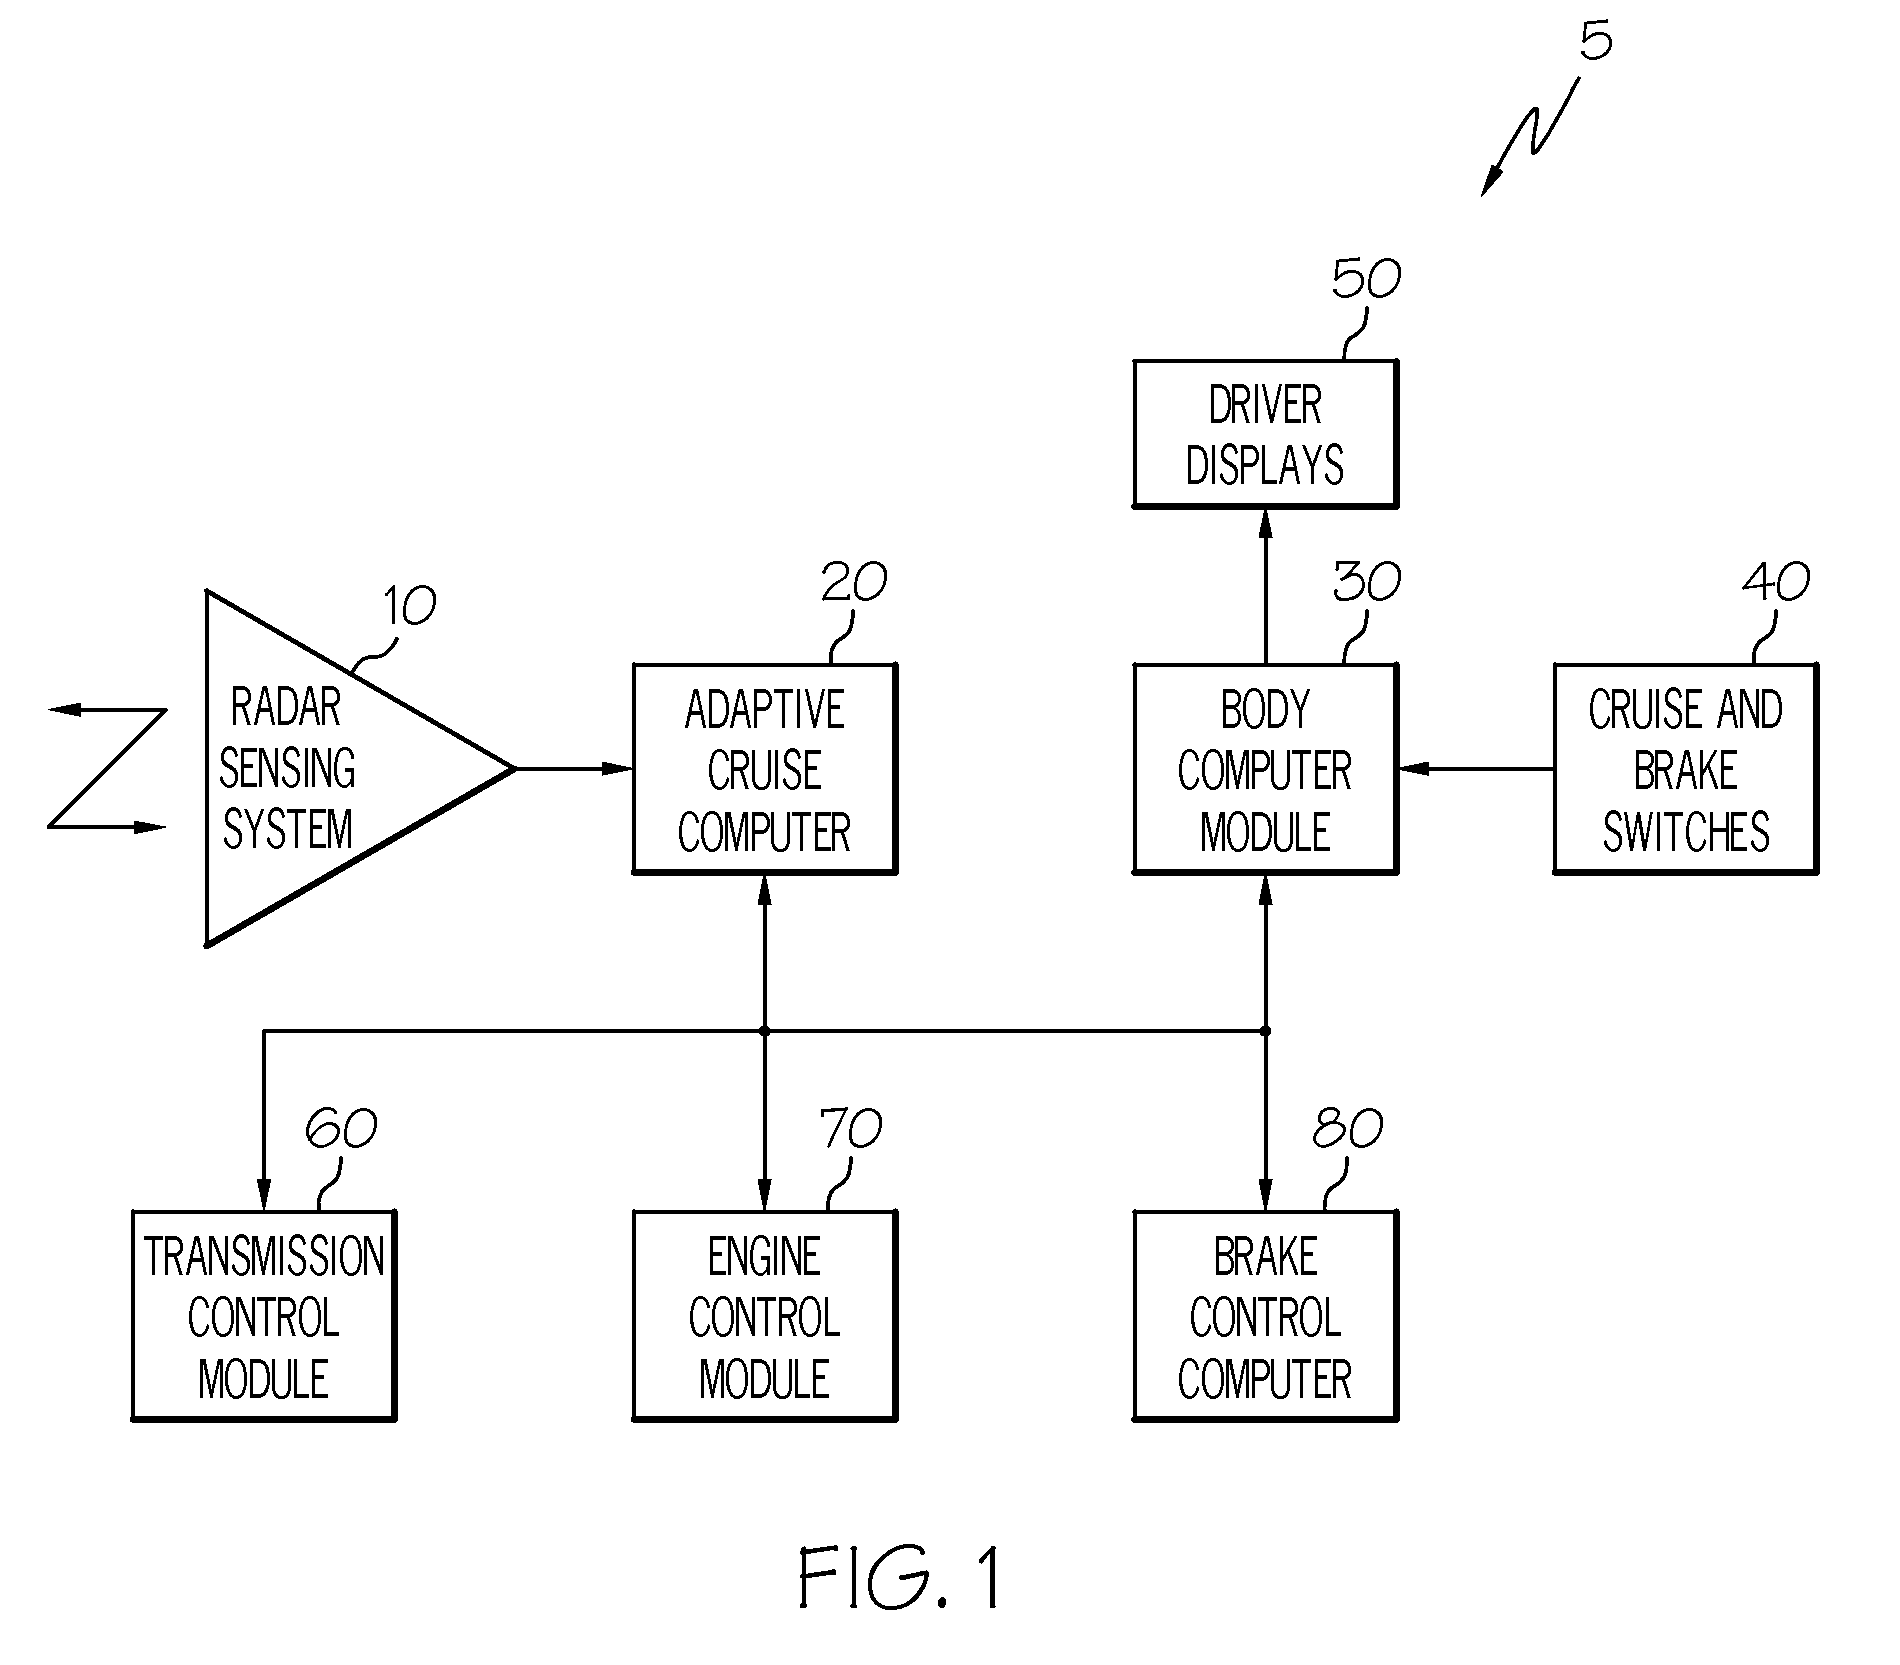 Driver inputs allowing full speed range adaptive cruise control to release brake hold